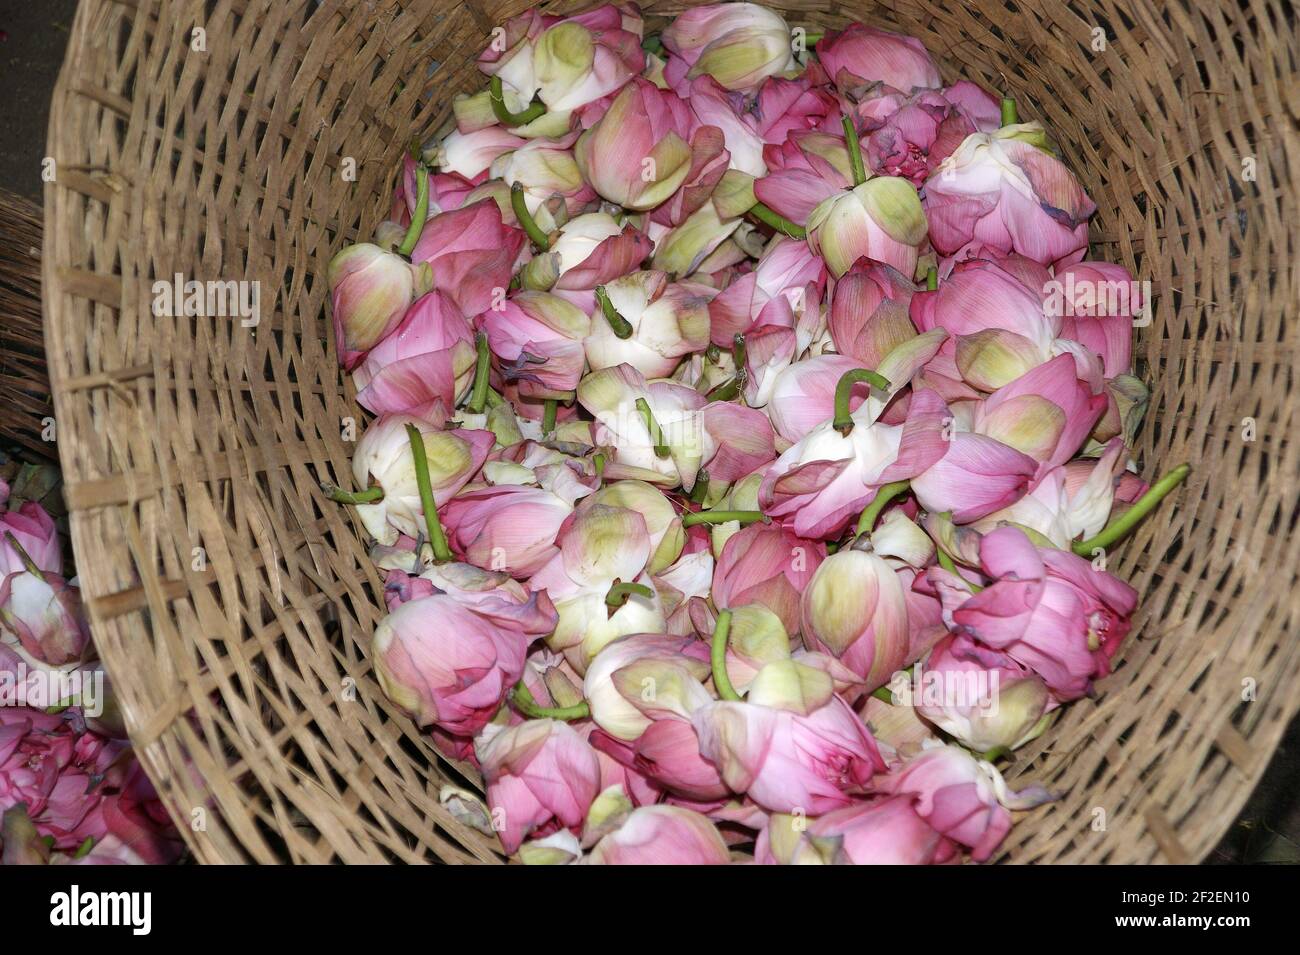 The buds of a lotus flower in a basket, Kerala, South India Stock Photo